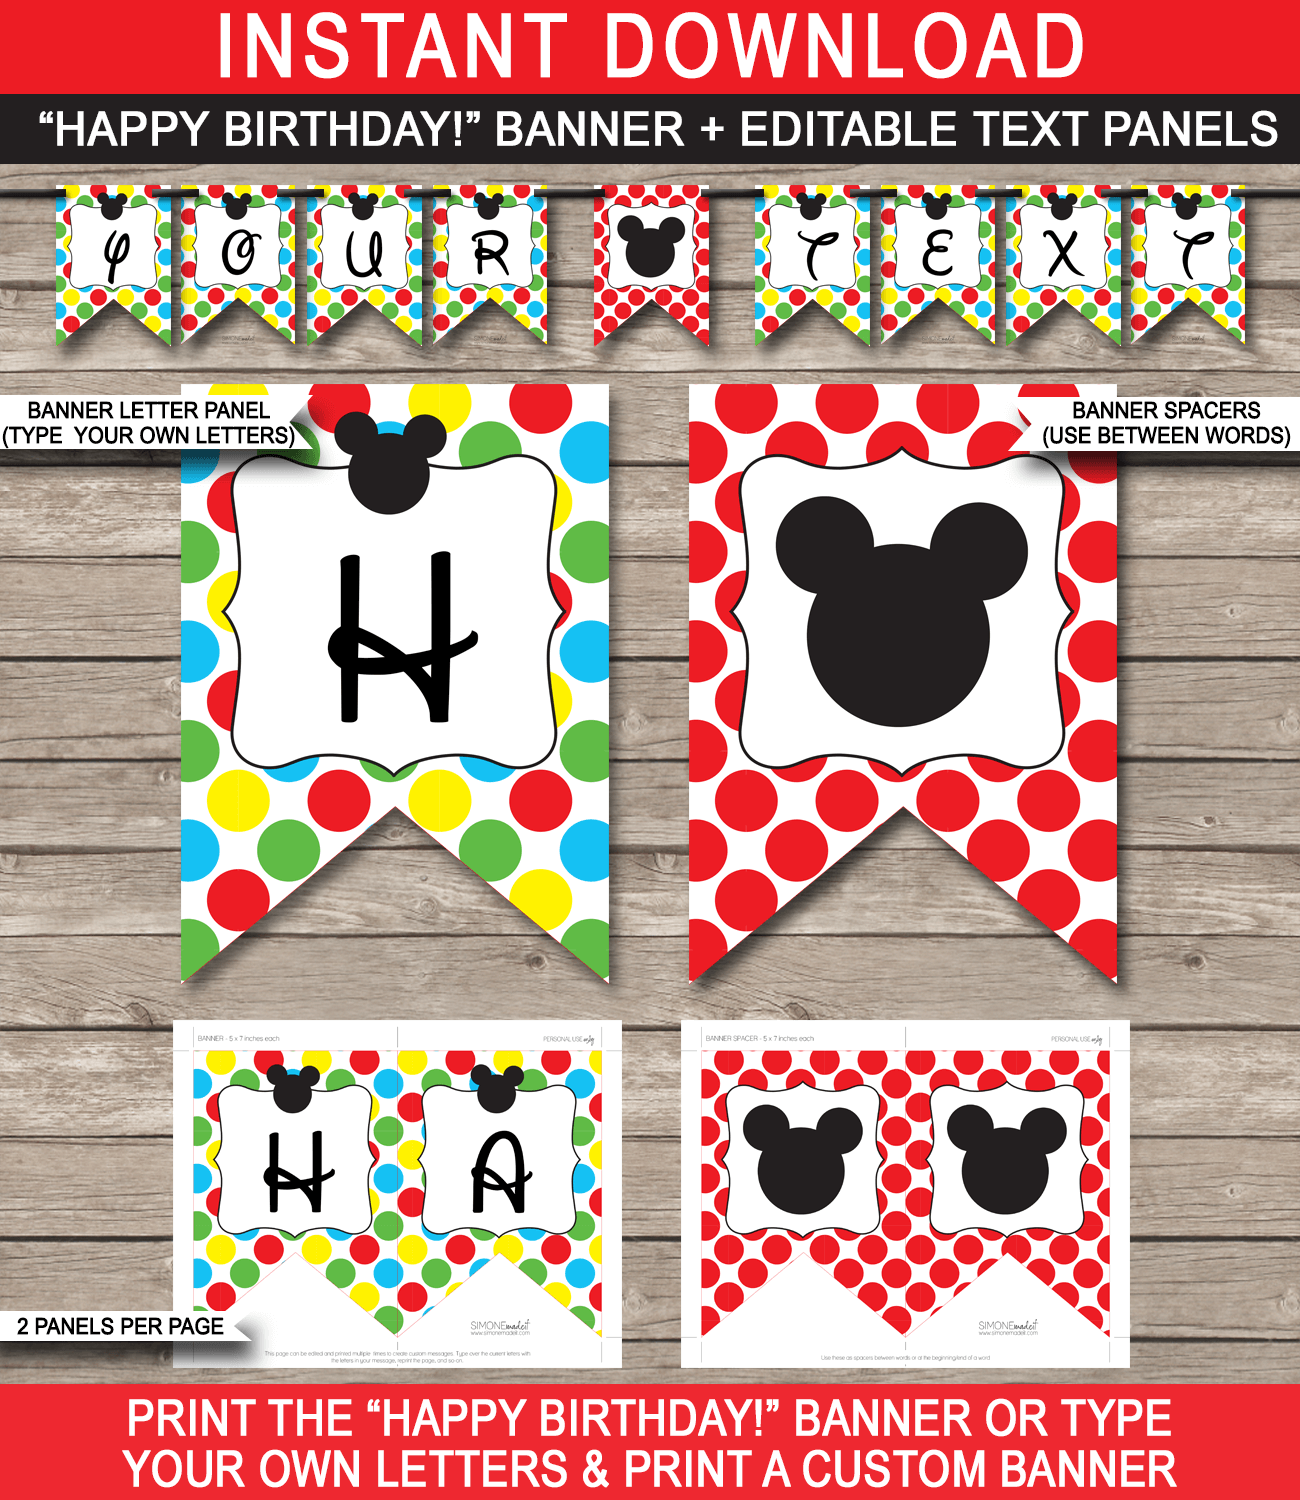 Mickey Mouse Party Banner Template - Mickey Mouse Bunting - Happy Birthday Banner - Birthday Party - Editable and Printable DIY Template - INSTANT DOWNLOAD $4.50 via simonemadeit.com